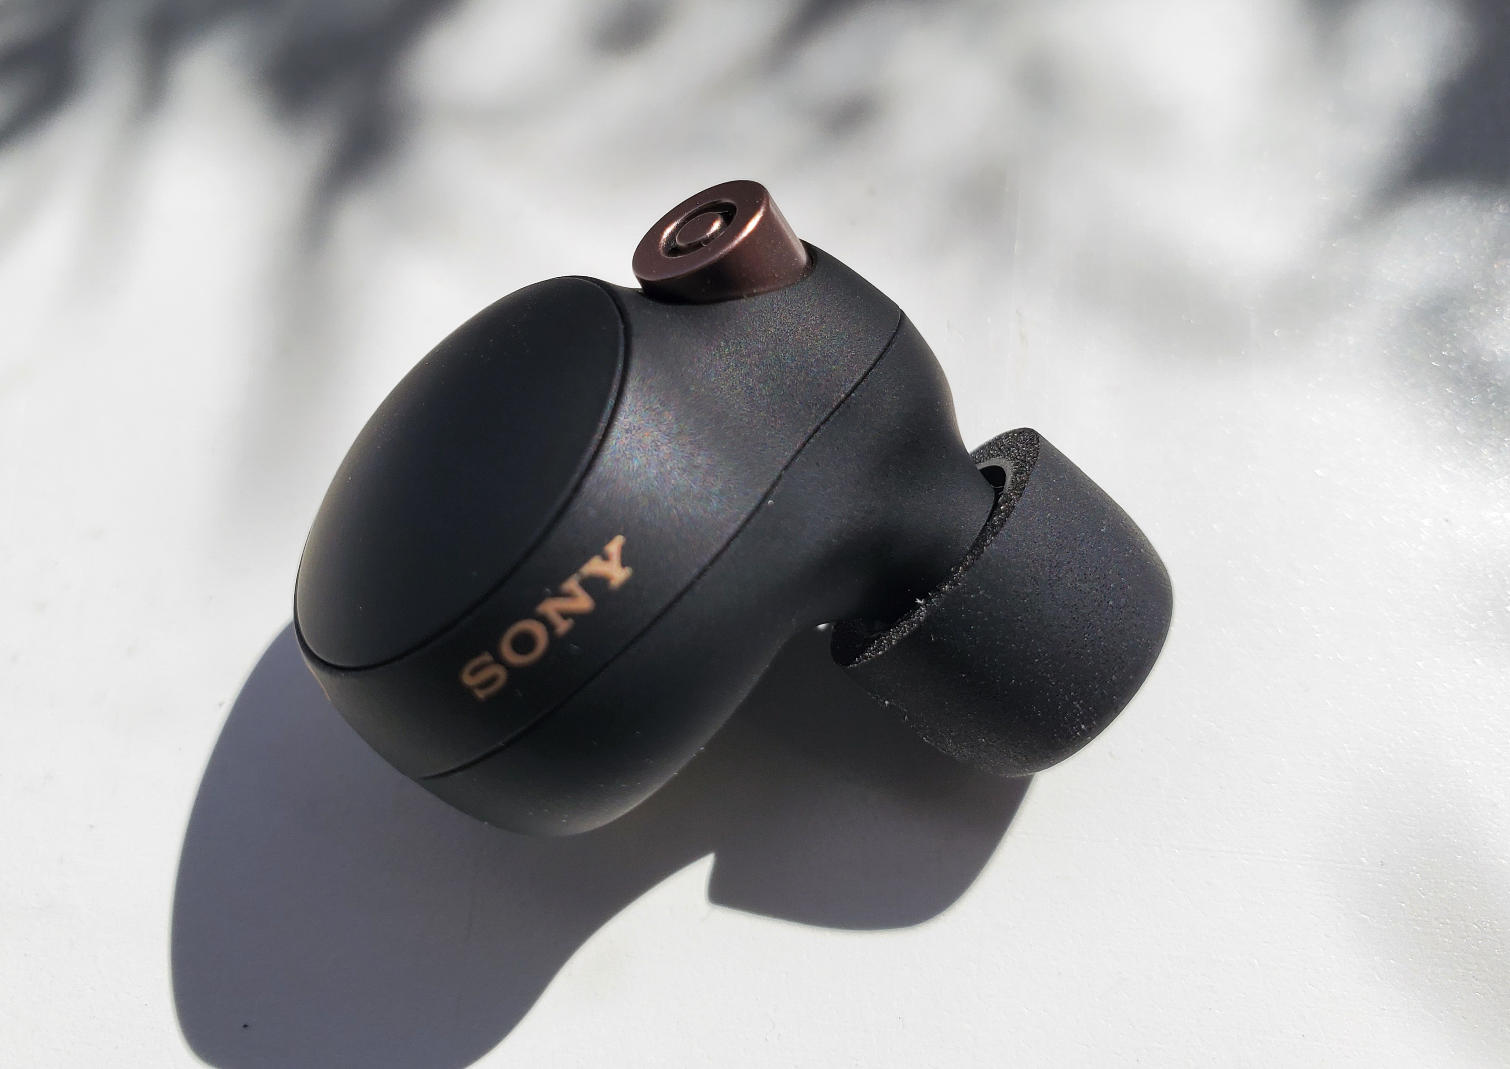 Sony WF-1000XM4 earbuds review: Superb noise cancellation